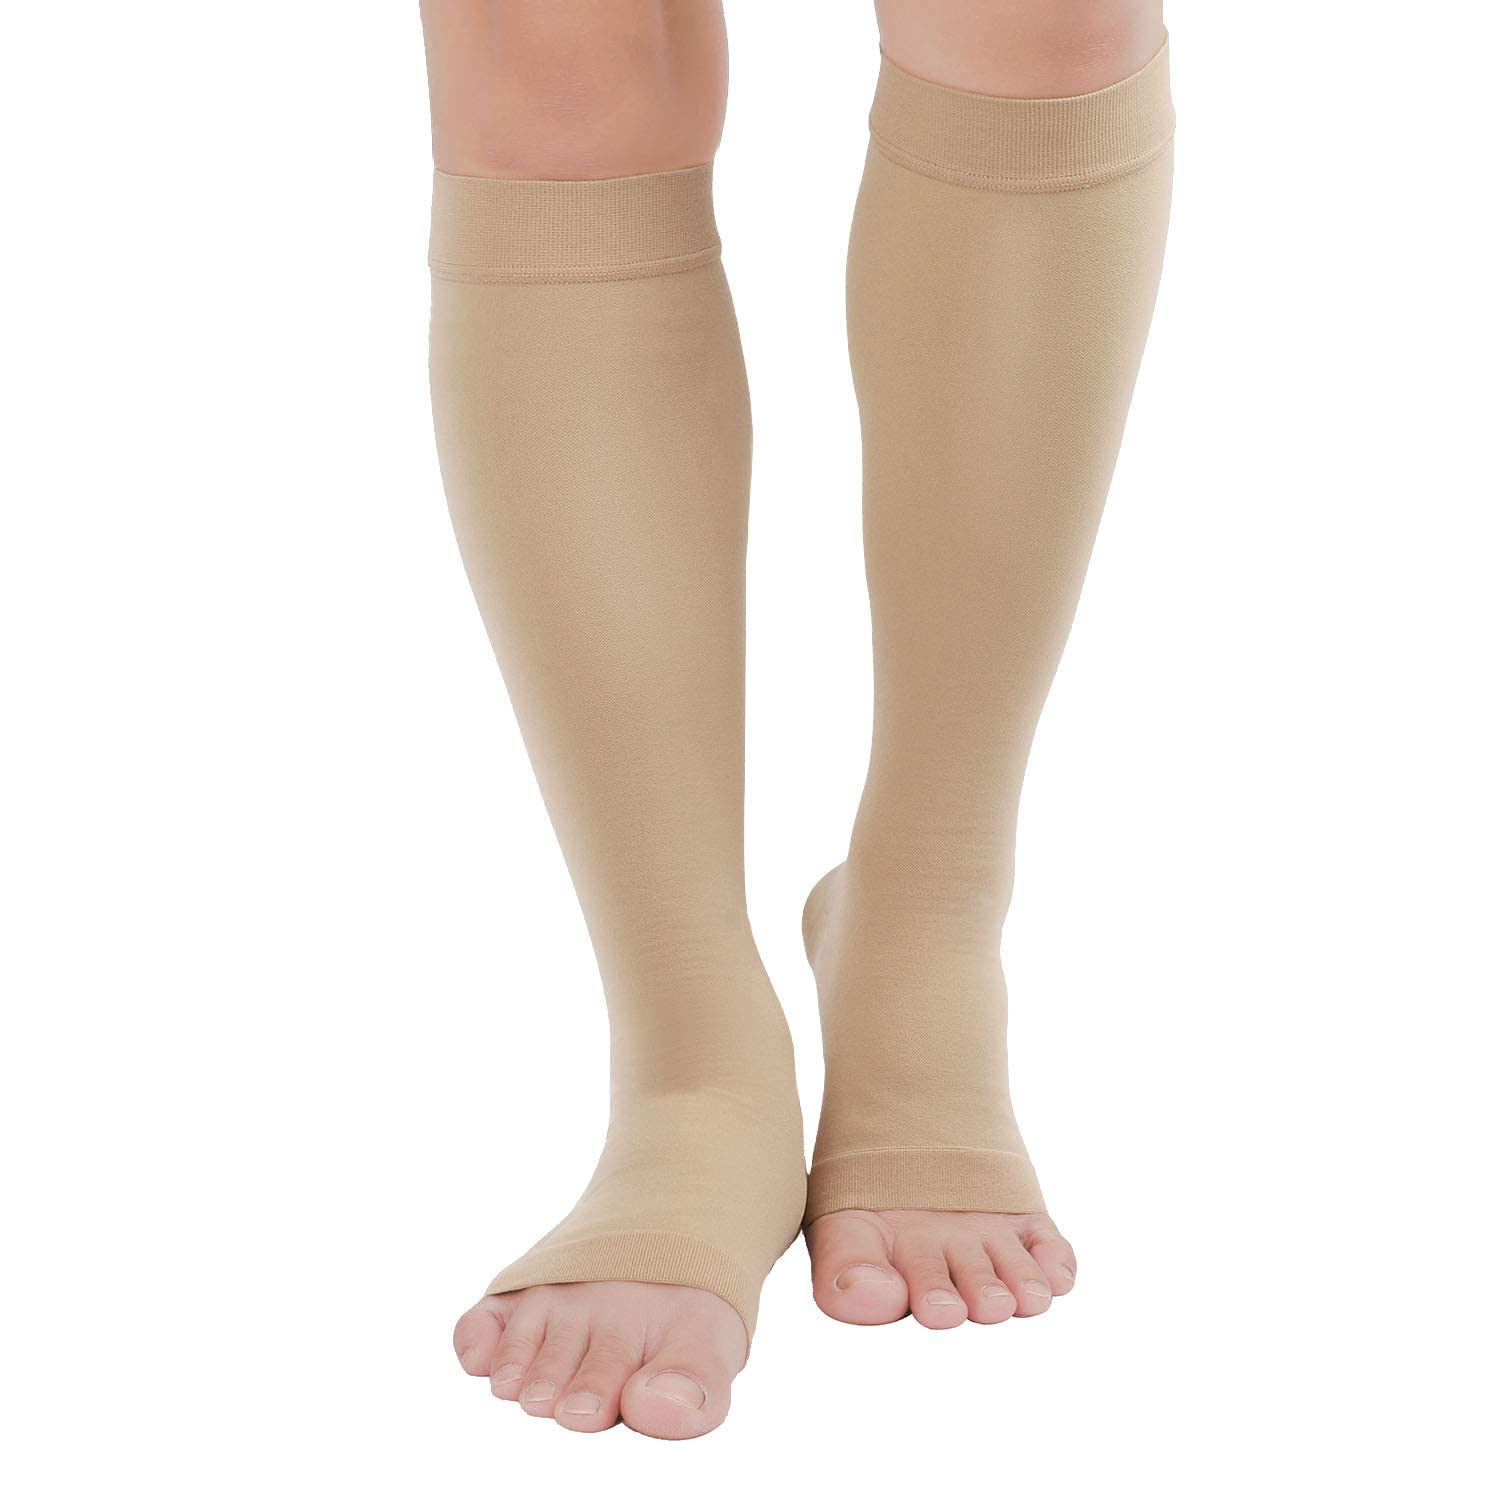 TOFLY Medical Compression Stockings 20-30 mmHg Knee High